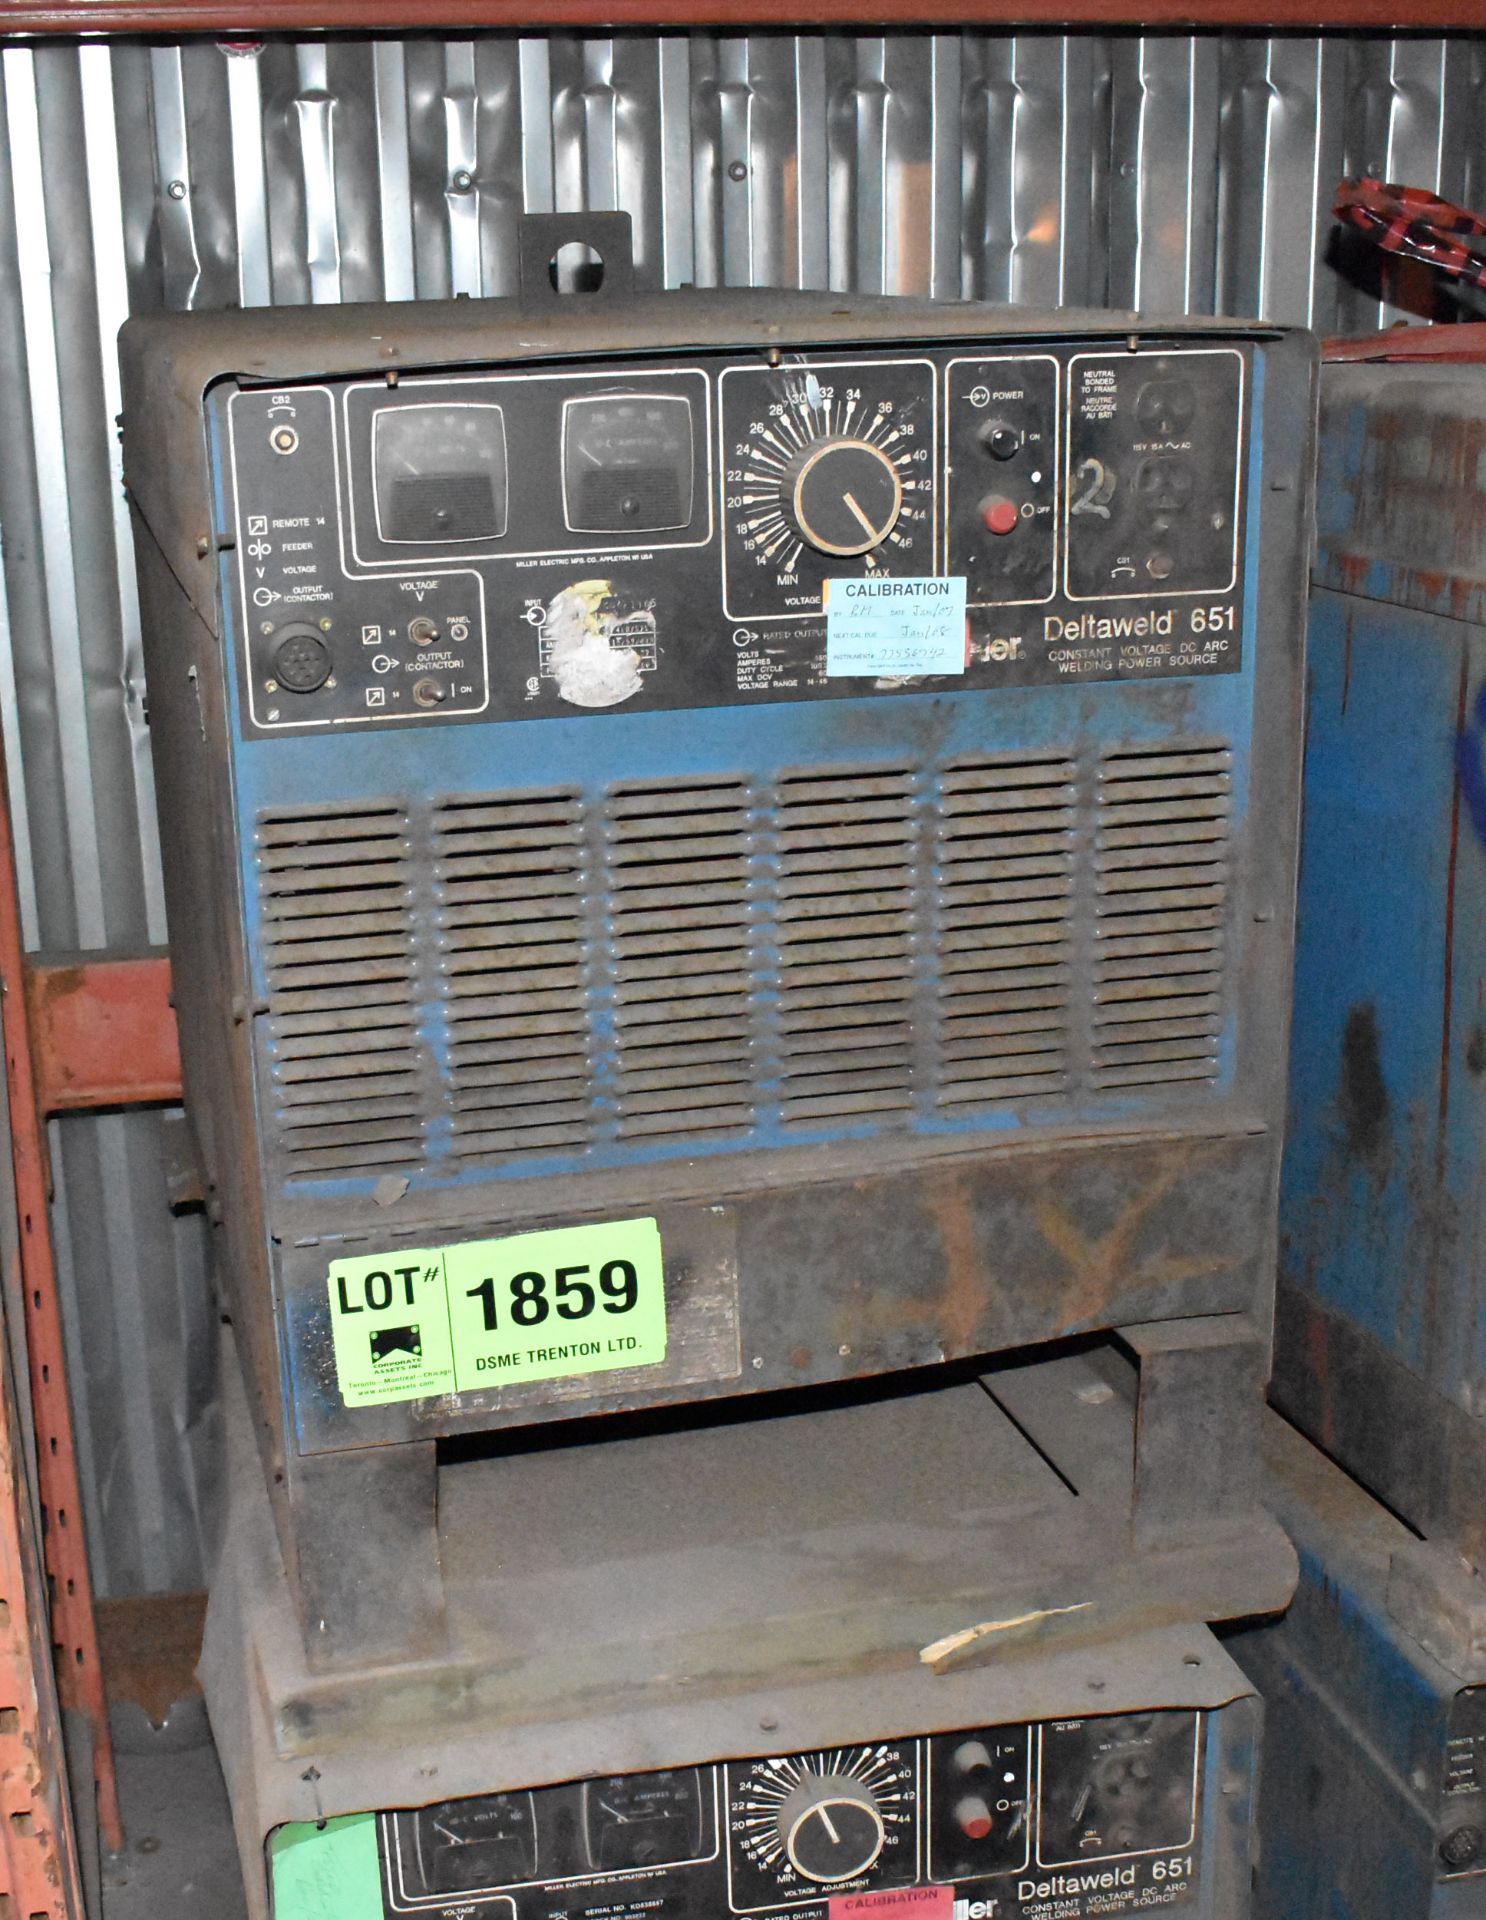 MILLER DELTAWELD 651 WELDING POWER SOURCE [RIGGING FEE FOR LOT# 1859 - $40 USD +PLUS TAXES]